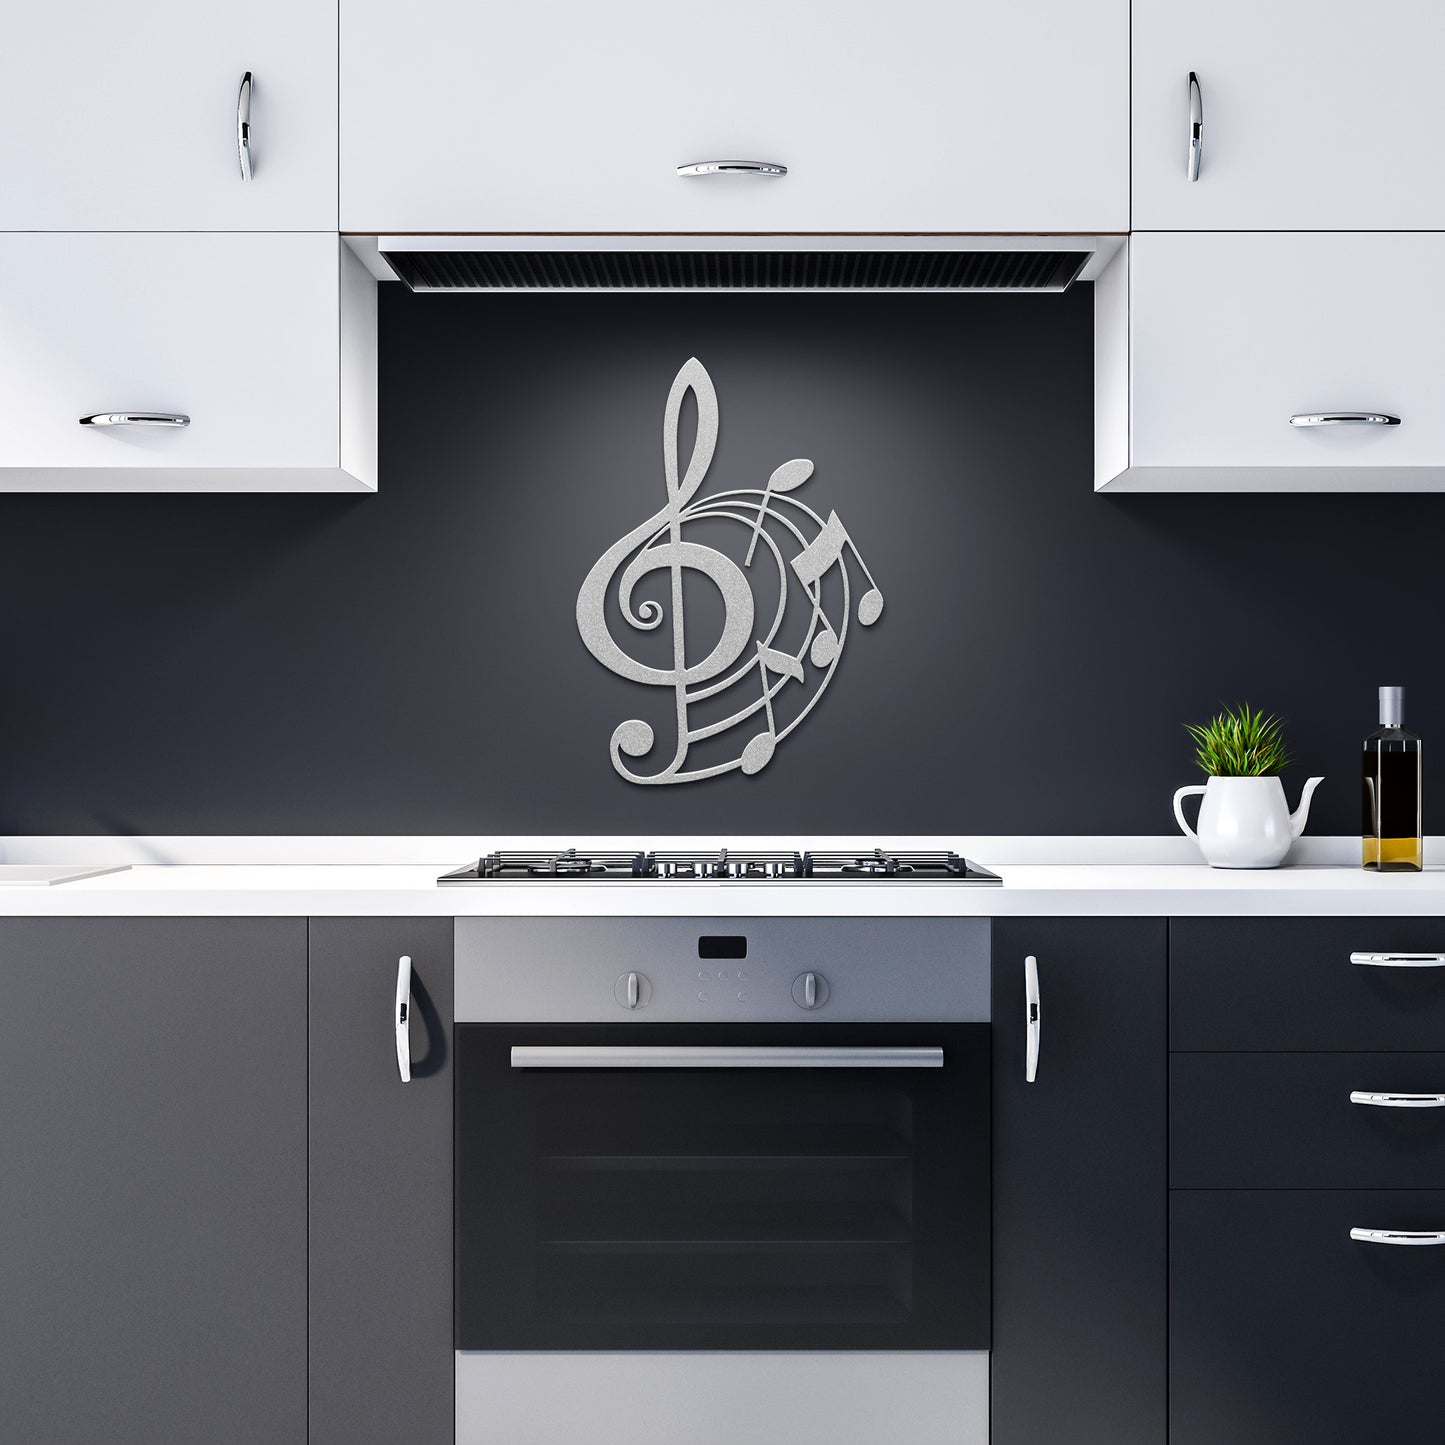 Musical Note Wall Art - Stylish Metal Decor for Music Lovers